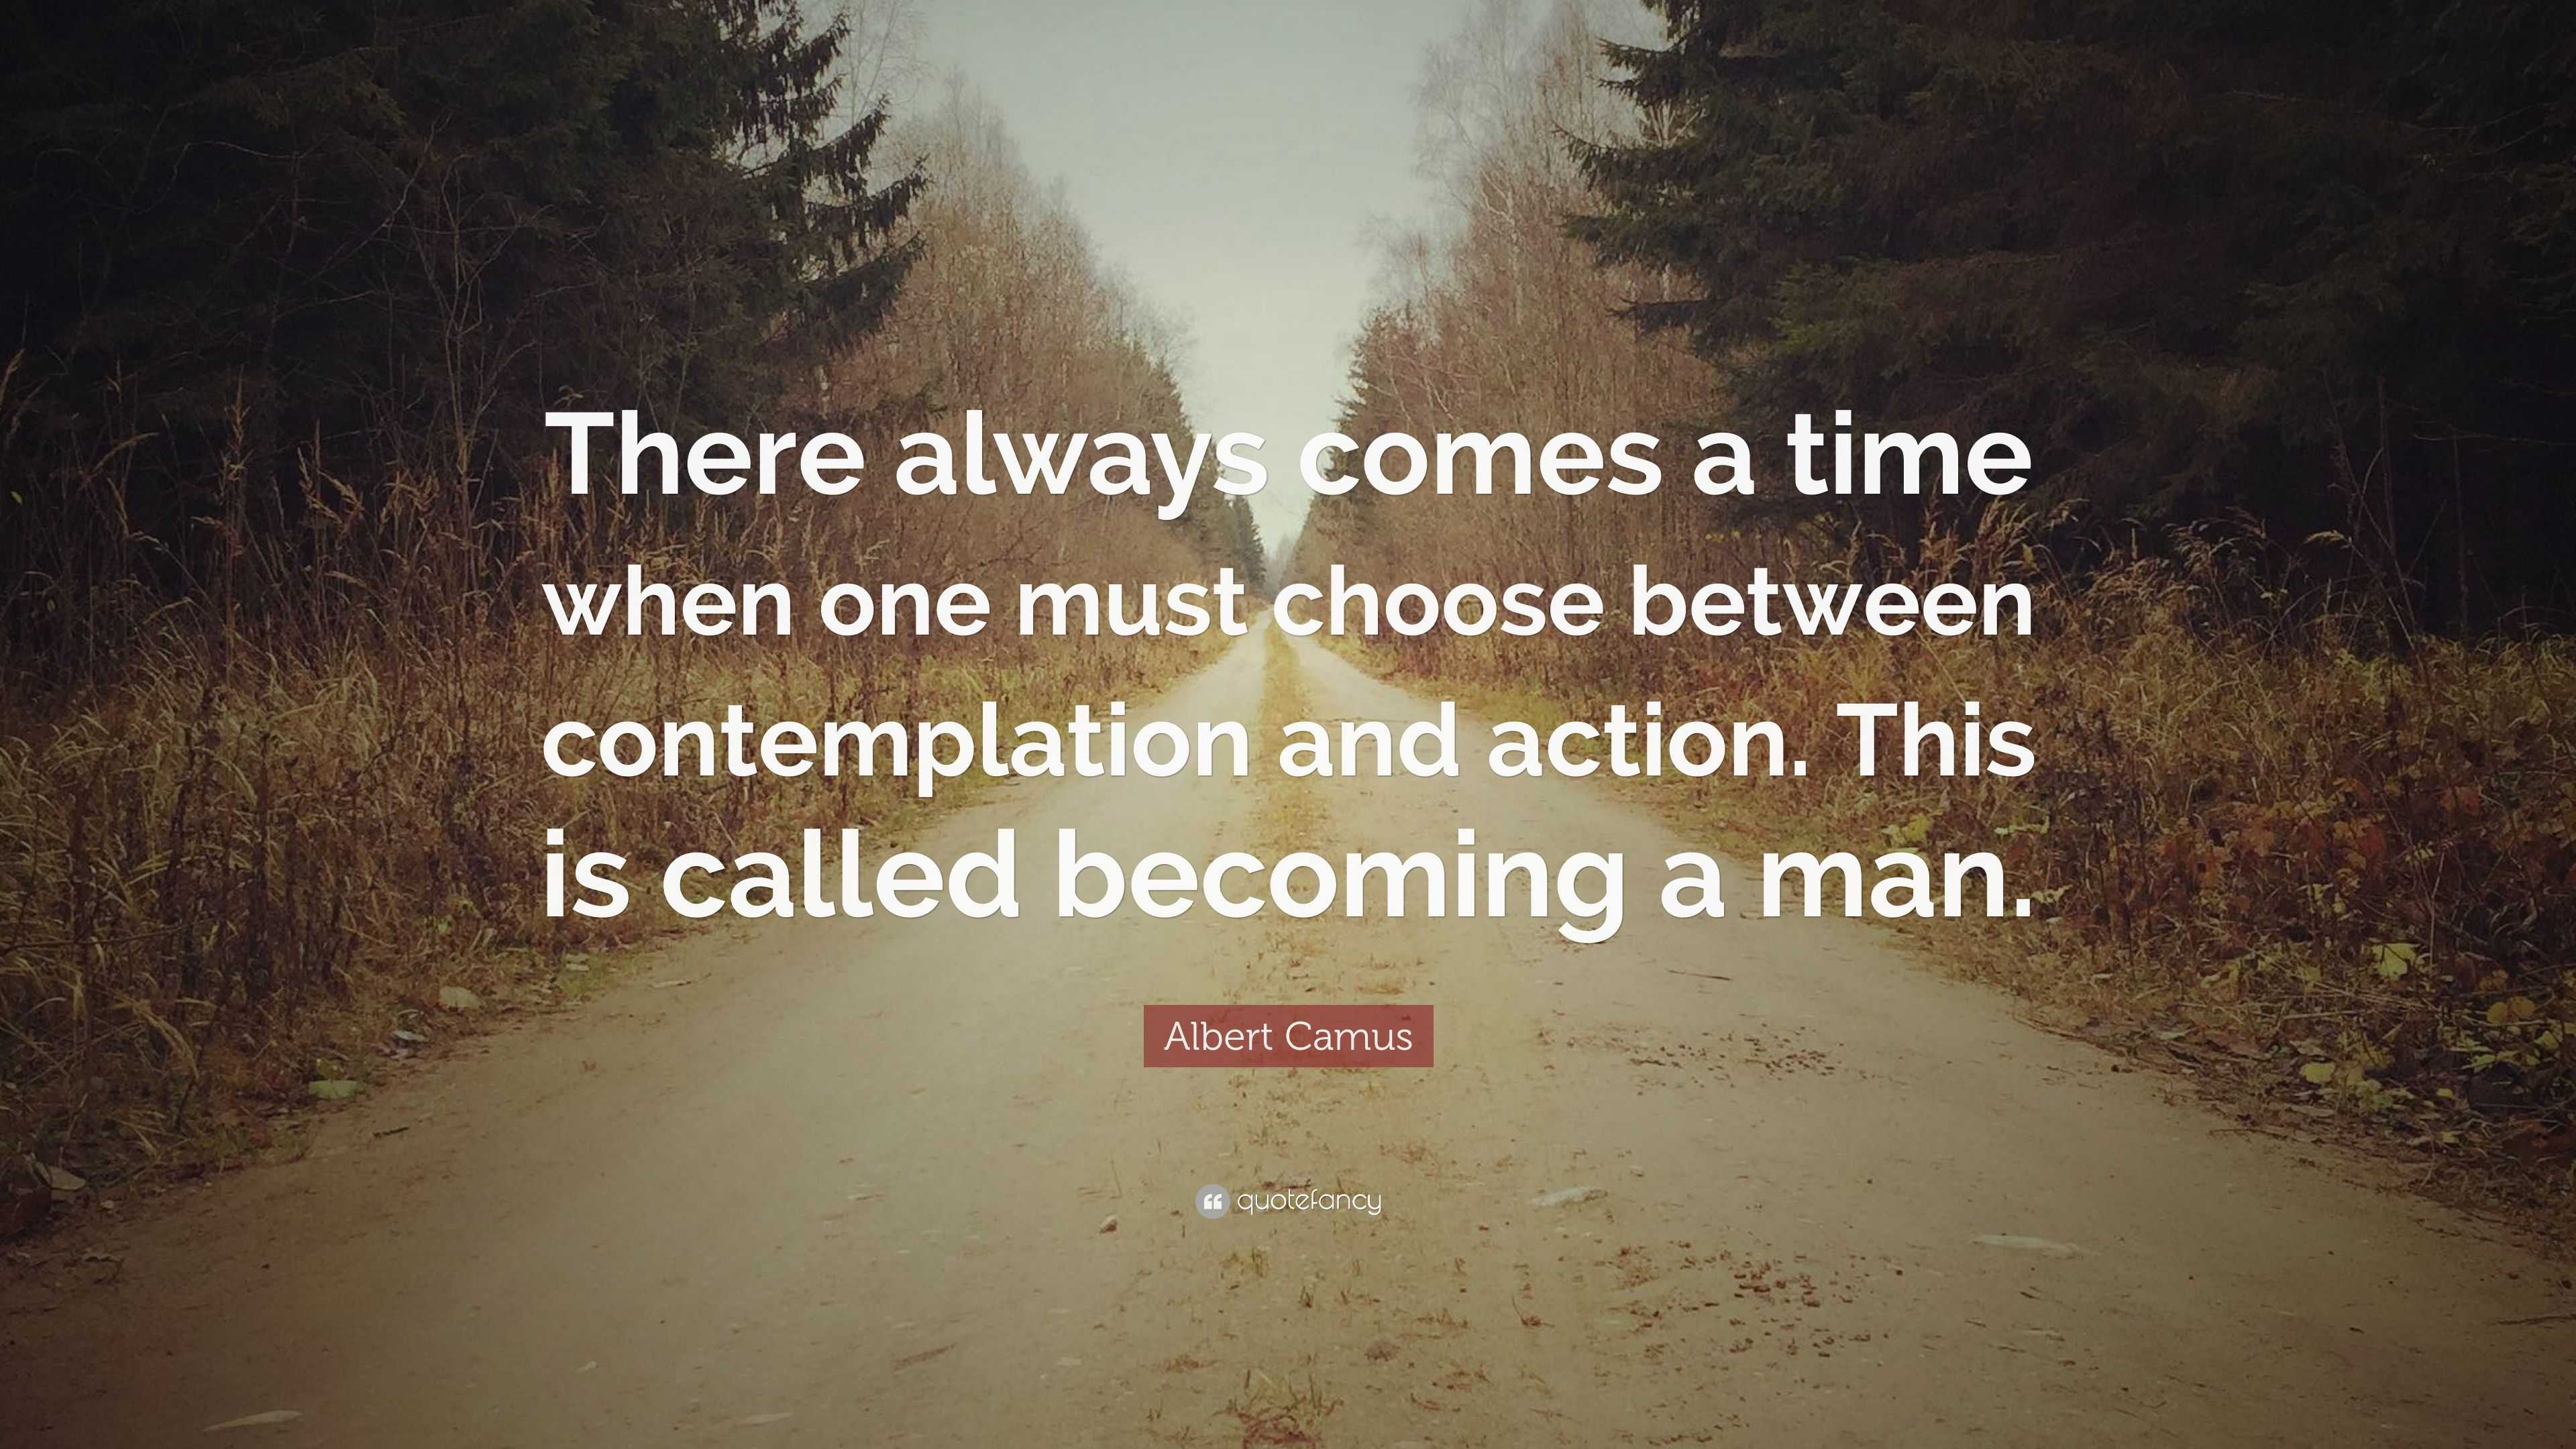 Albert Camus Quote: “There always comes a time when one must choose ...